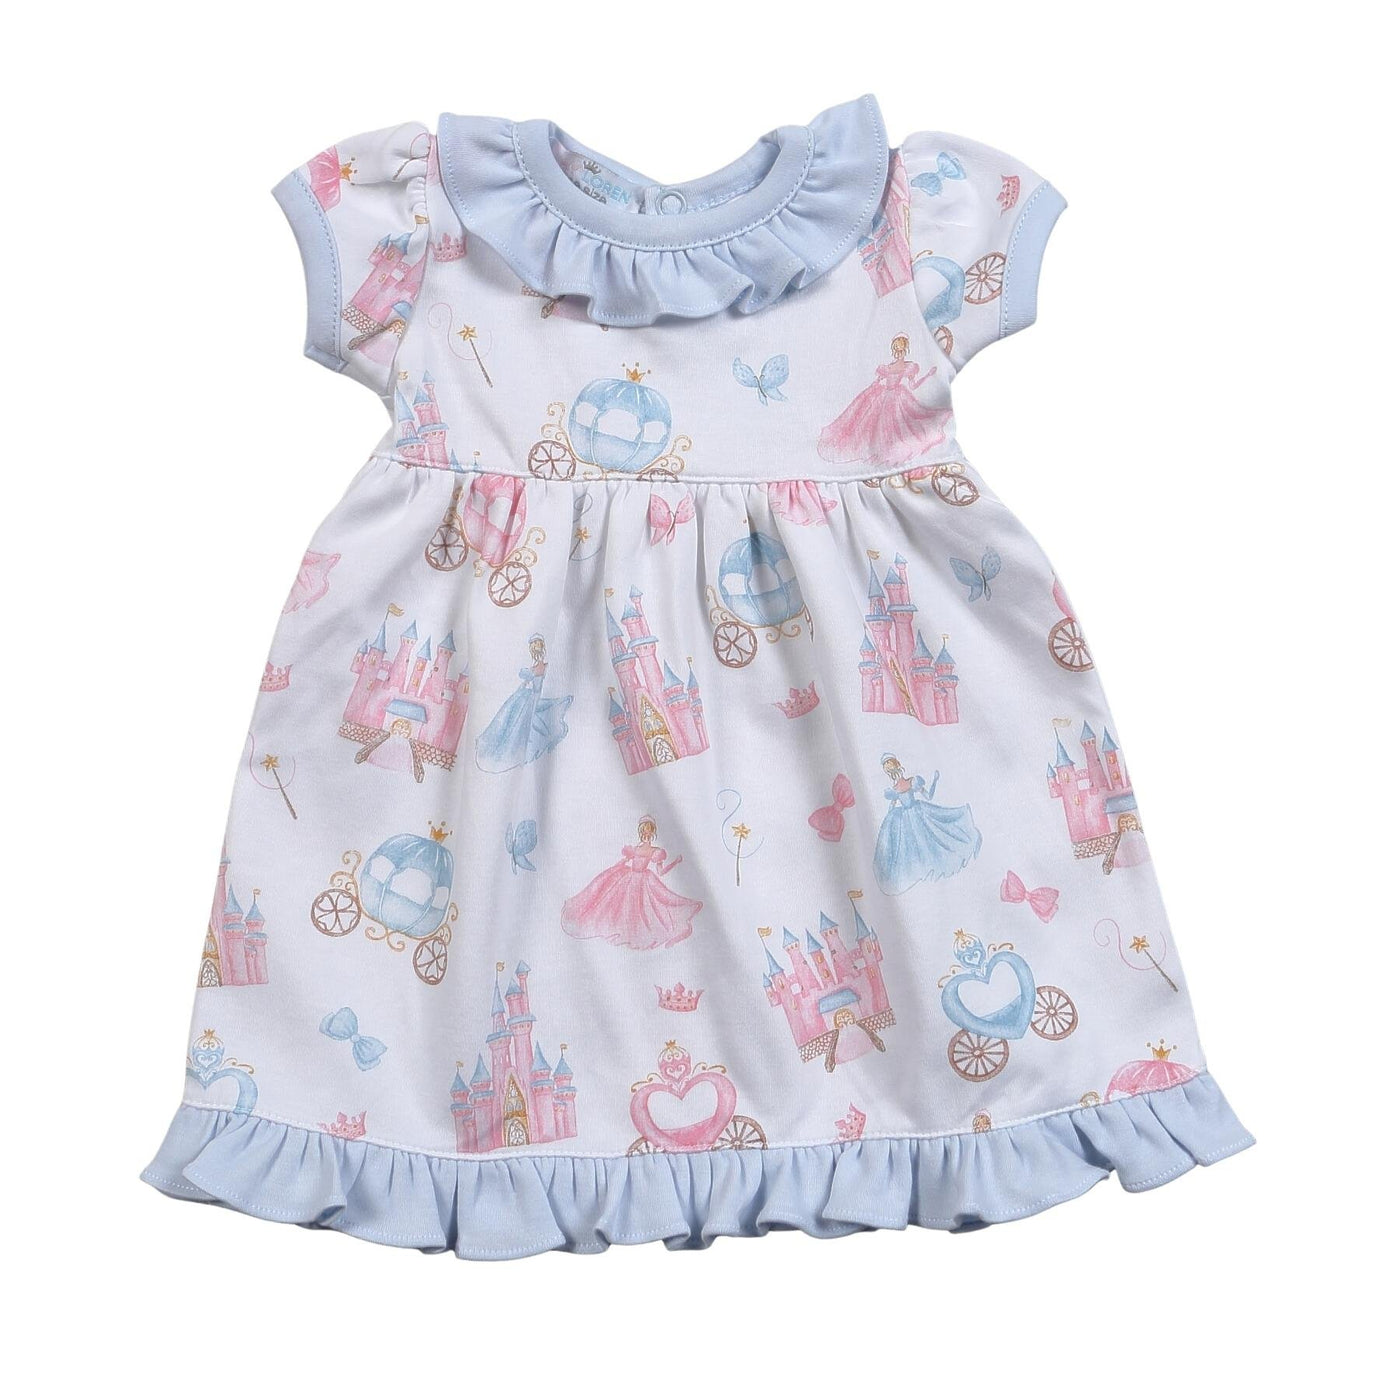 PRINCESS AND CASTLES PIMA DOLL GOWN - Breckenridge Baby